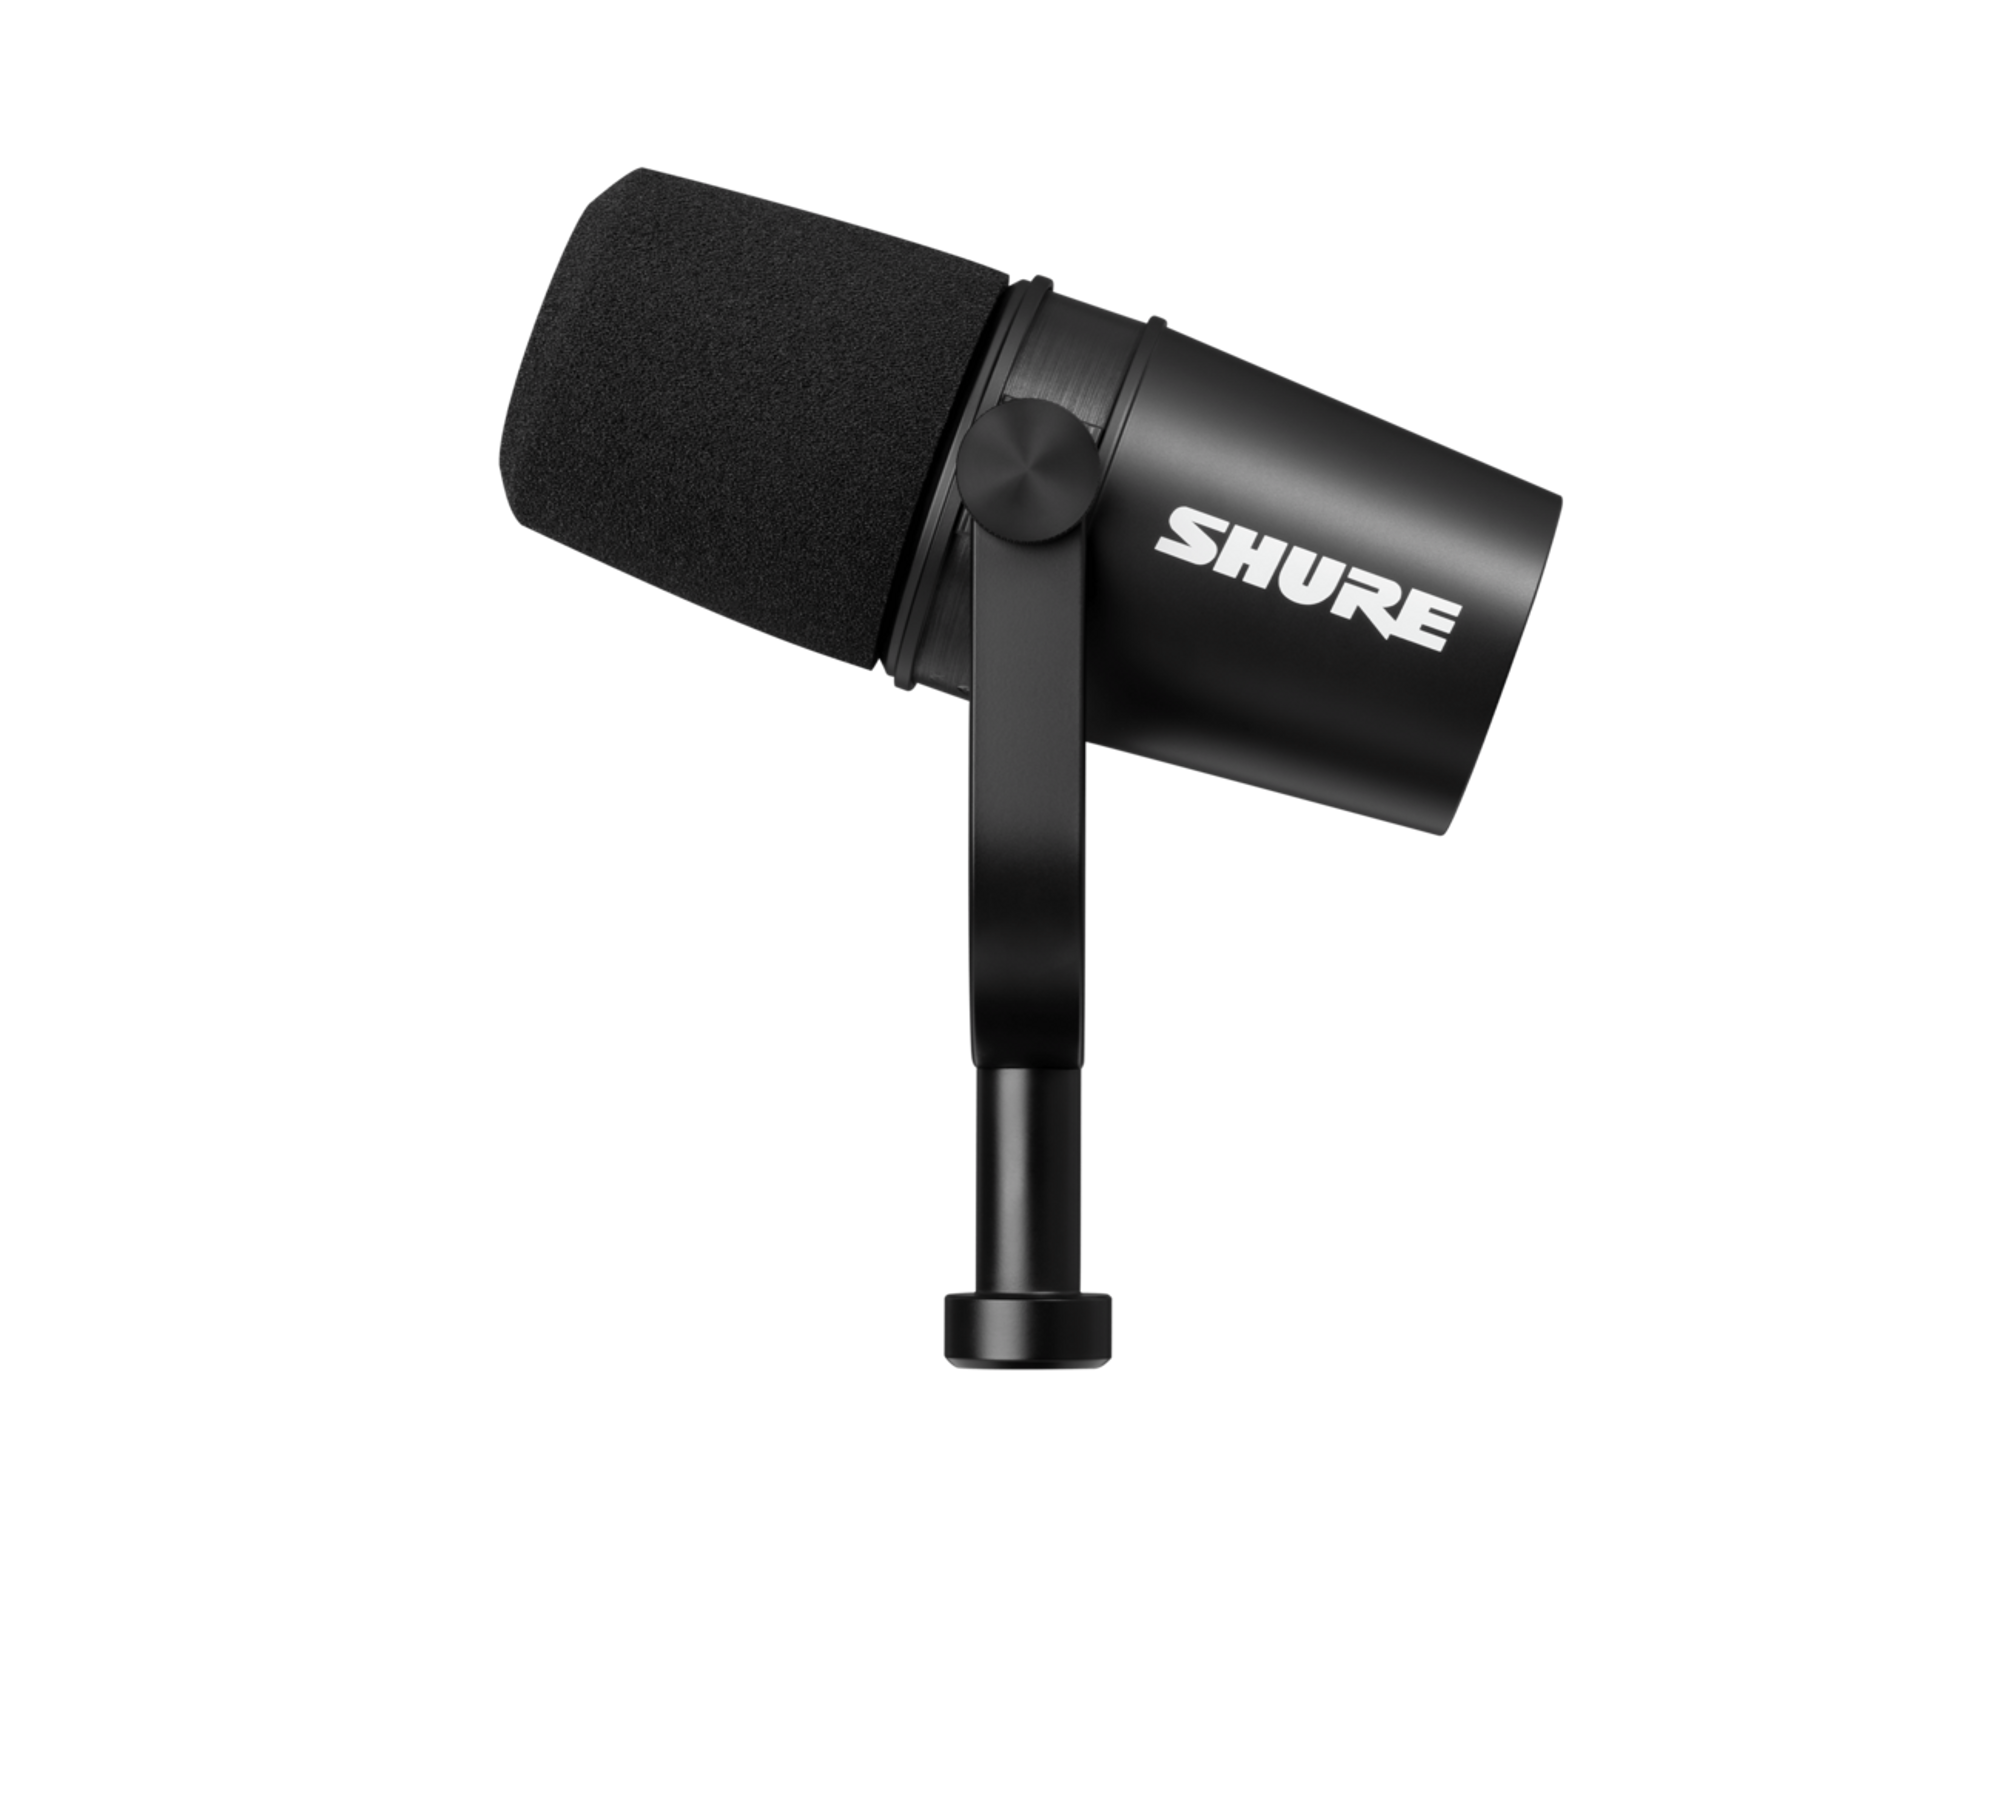 Shure MV7X Microphone Review with Samples Comparing the SM7B and SM58 